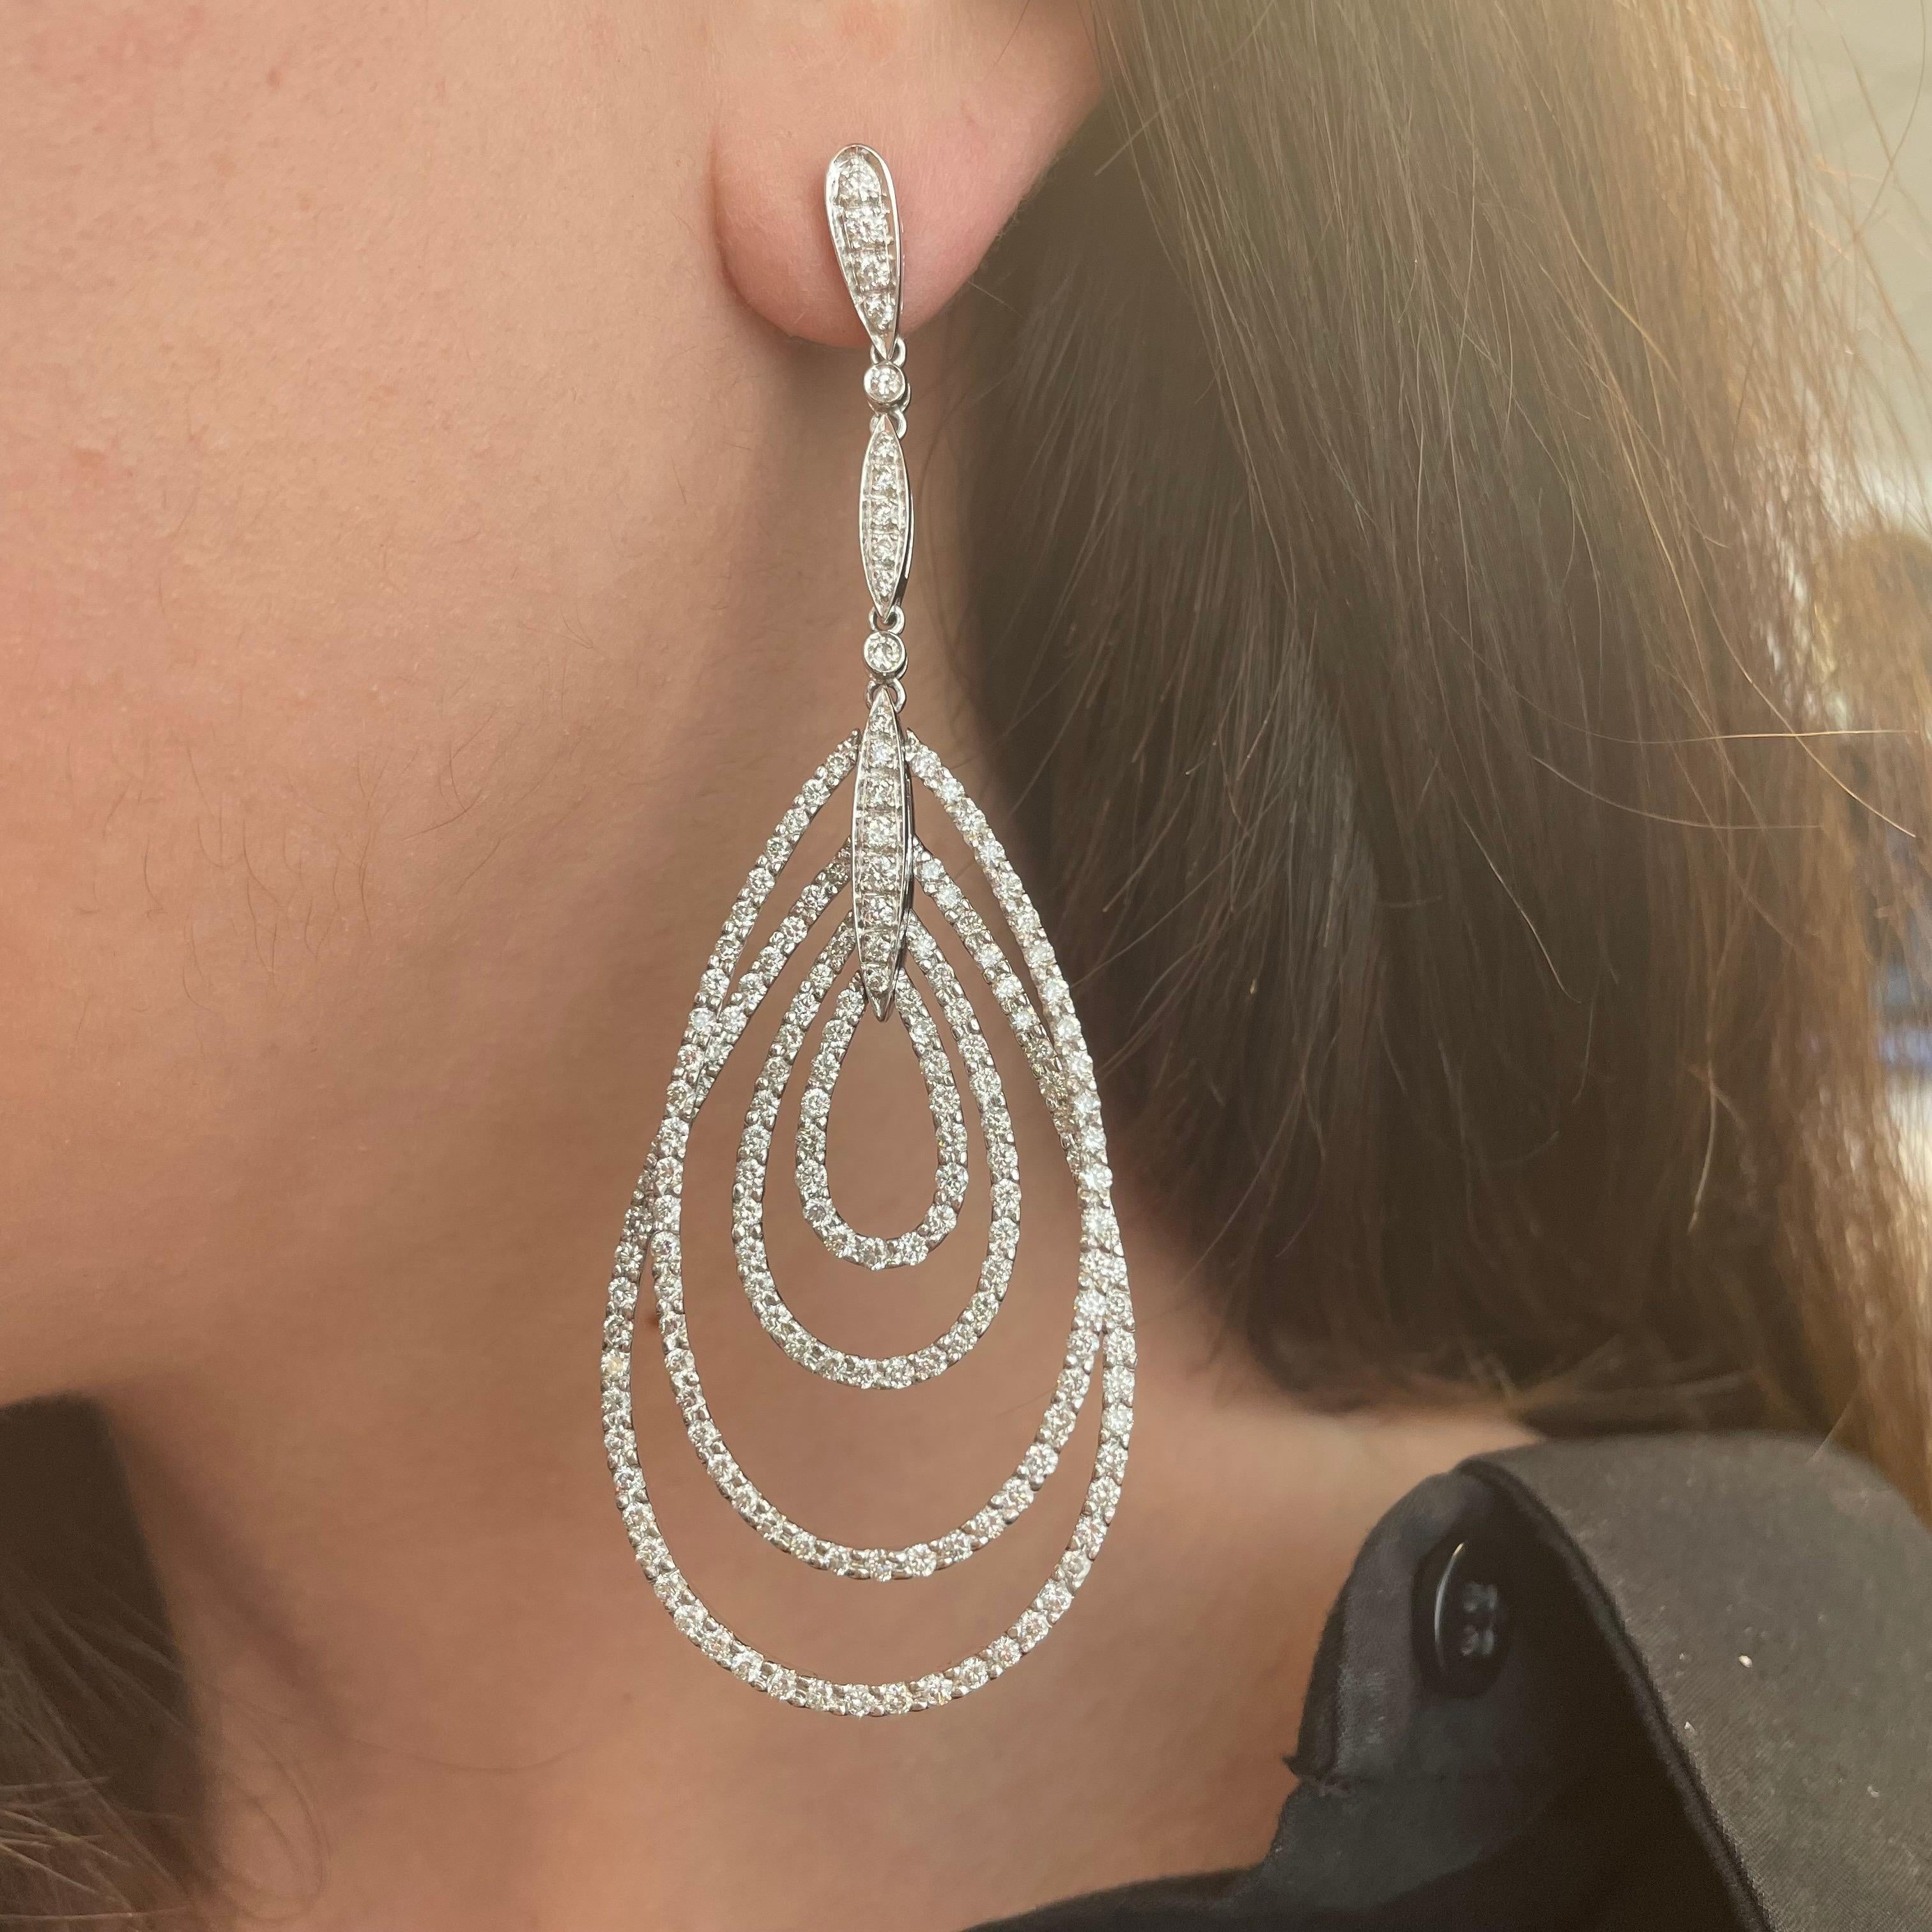 Stunning pave diamond loop/hoop chandelier earrings.
340 round brilliant diamonds, 6.23 carats total. Approximately H/I color grade and SI clarity grade. Prong set, 18k white gold.
Accommodated with an up to date appraisal by a GIA G.G. upon